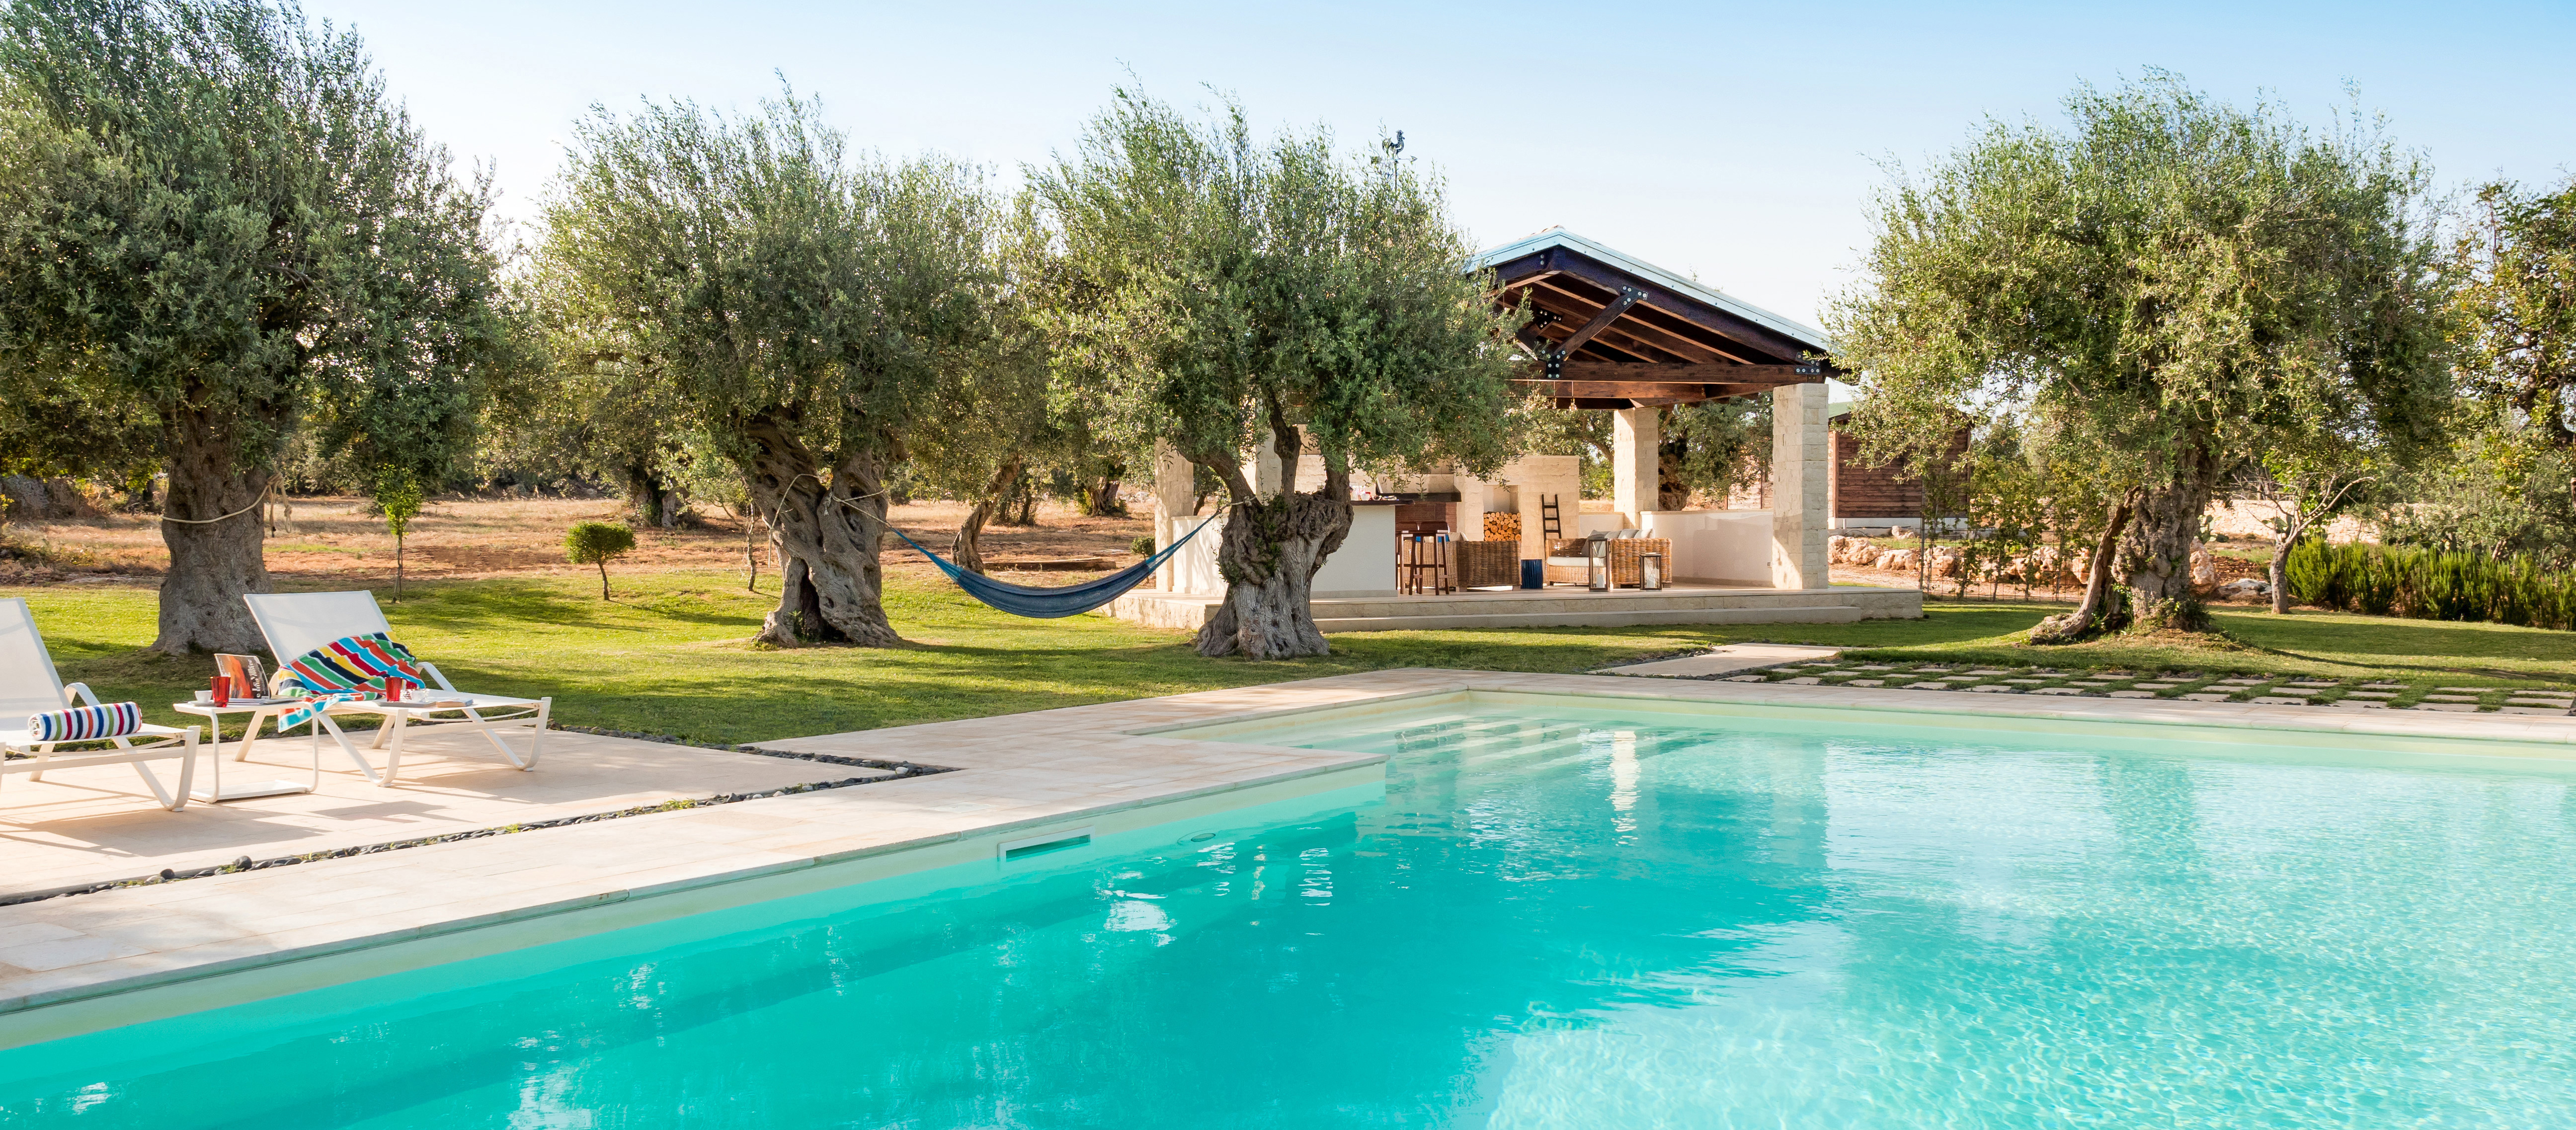 Villas great for summer or winter, South-east Sicily| Pure Italy - 2